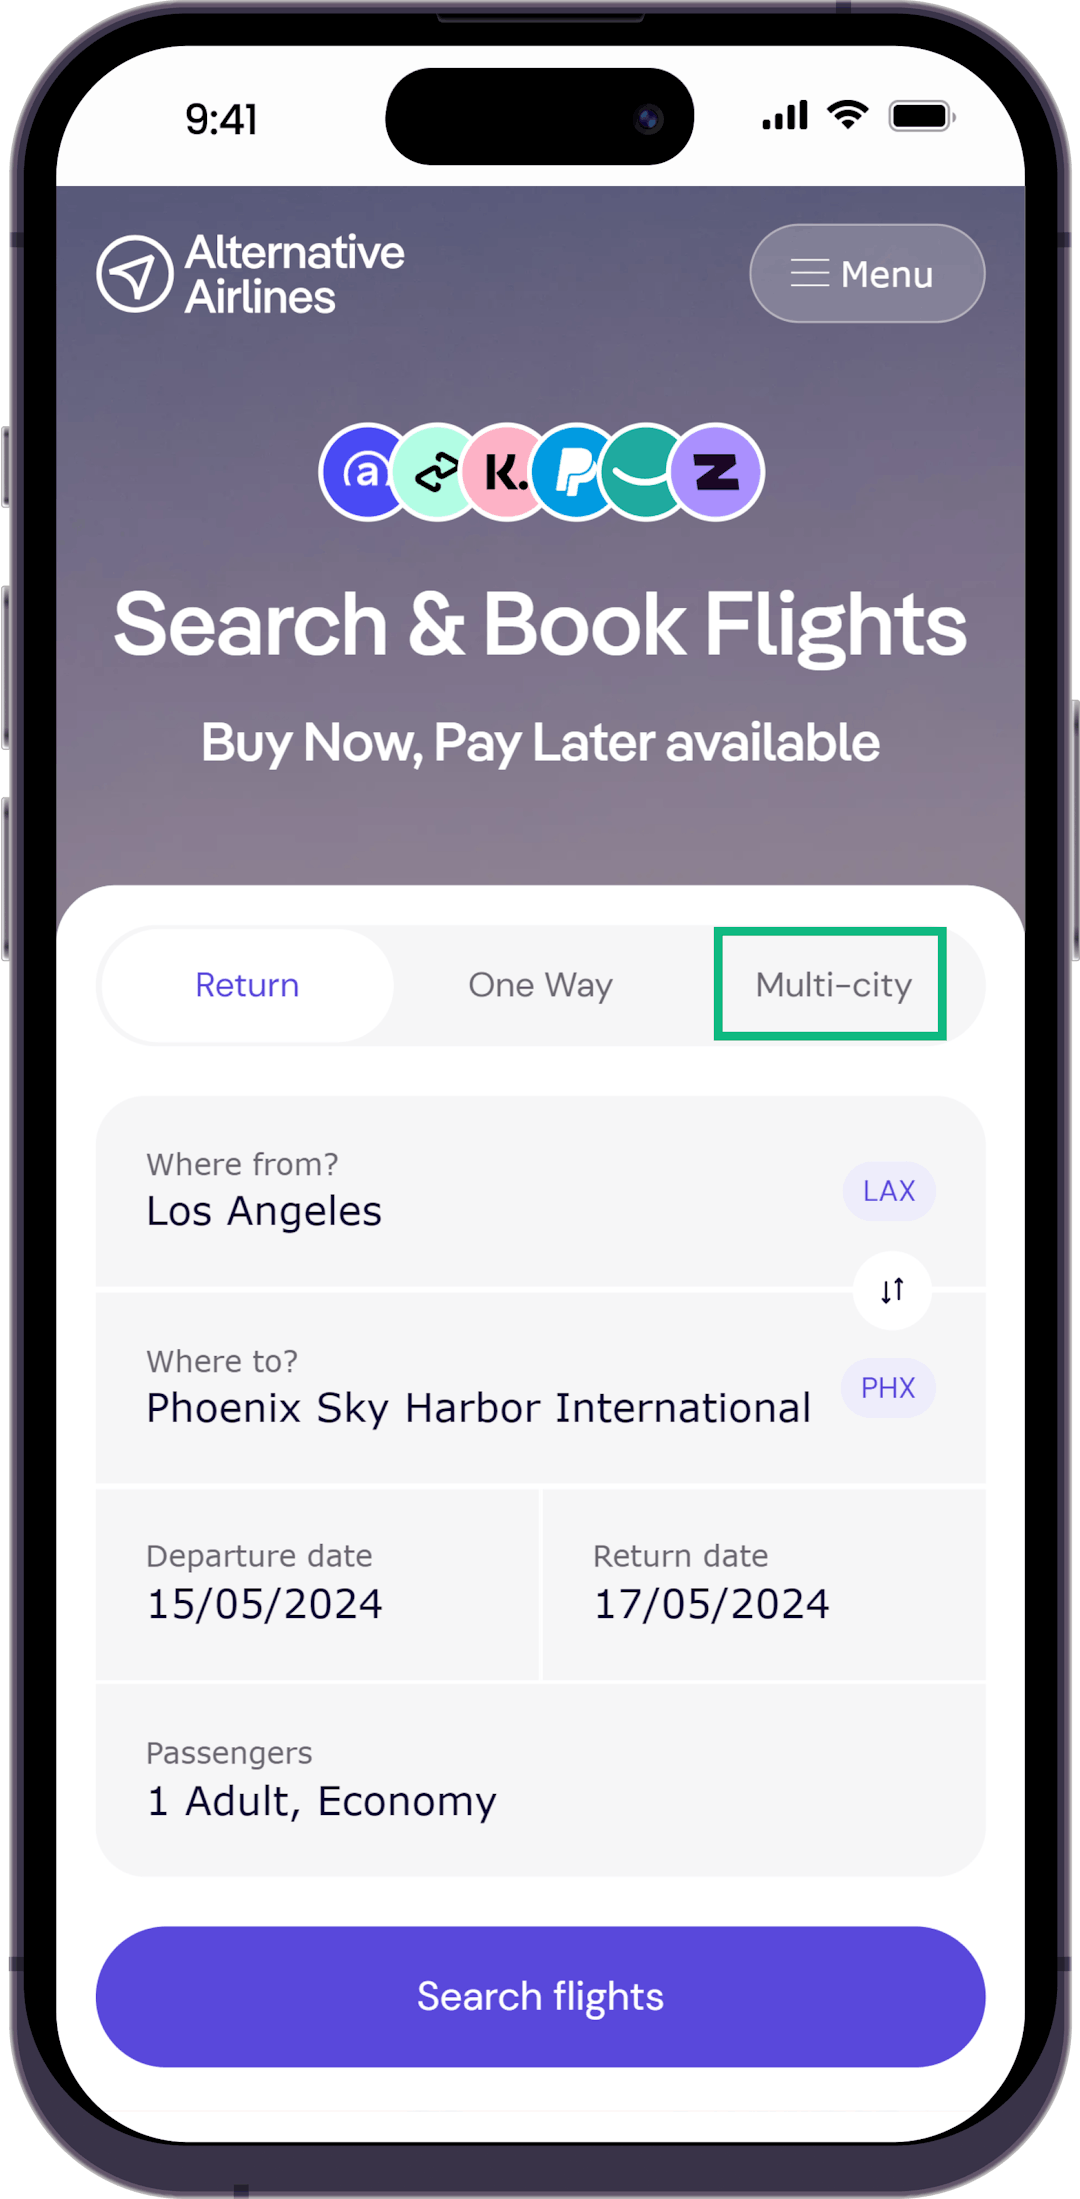 Step 1 - Select multi-city option in search form